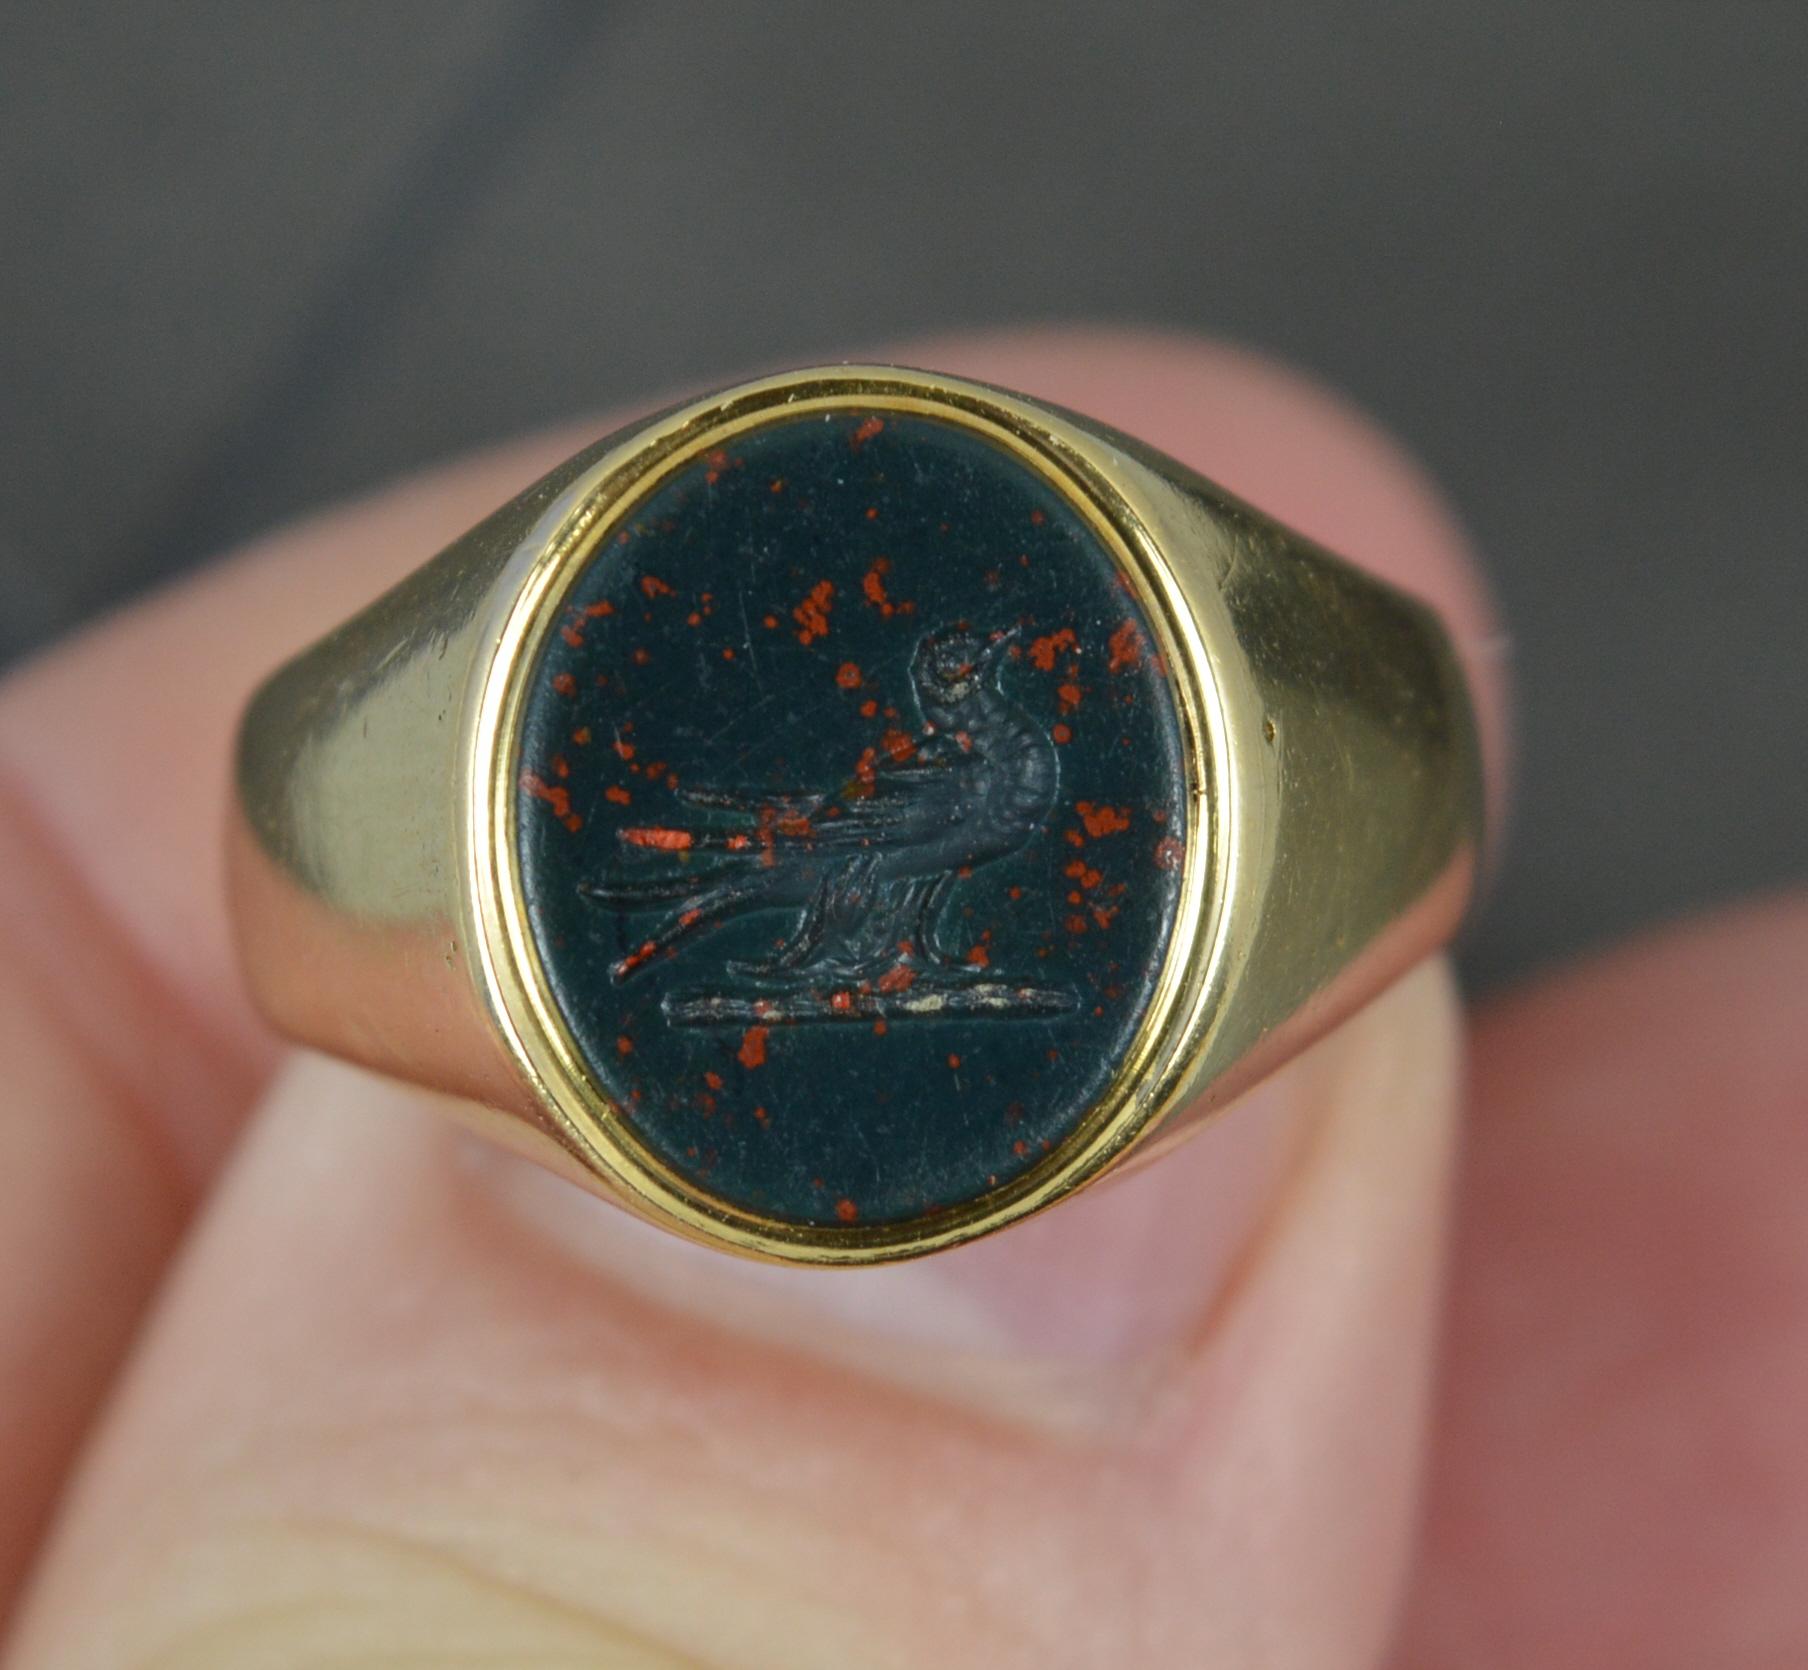 A superb antique signet ring.
Solid 18 carat yellow gold example.
Set with a single, oval shaped bloodstone to centre. 10.3mm x 12.3mm stone. Hand carved intaglio to depict a resting bird, looks to be the dove of peace.

CONDITION ; Very good. Clean